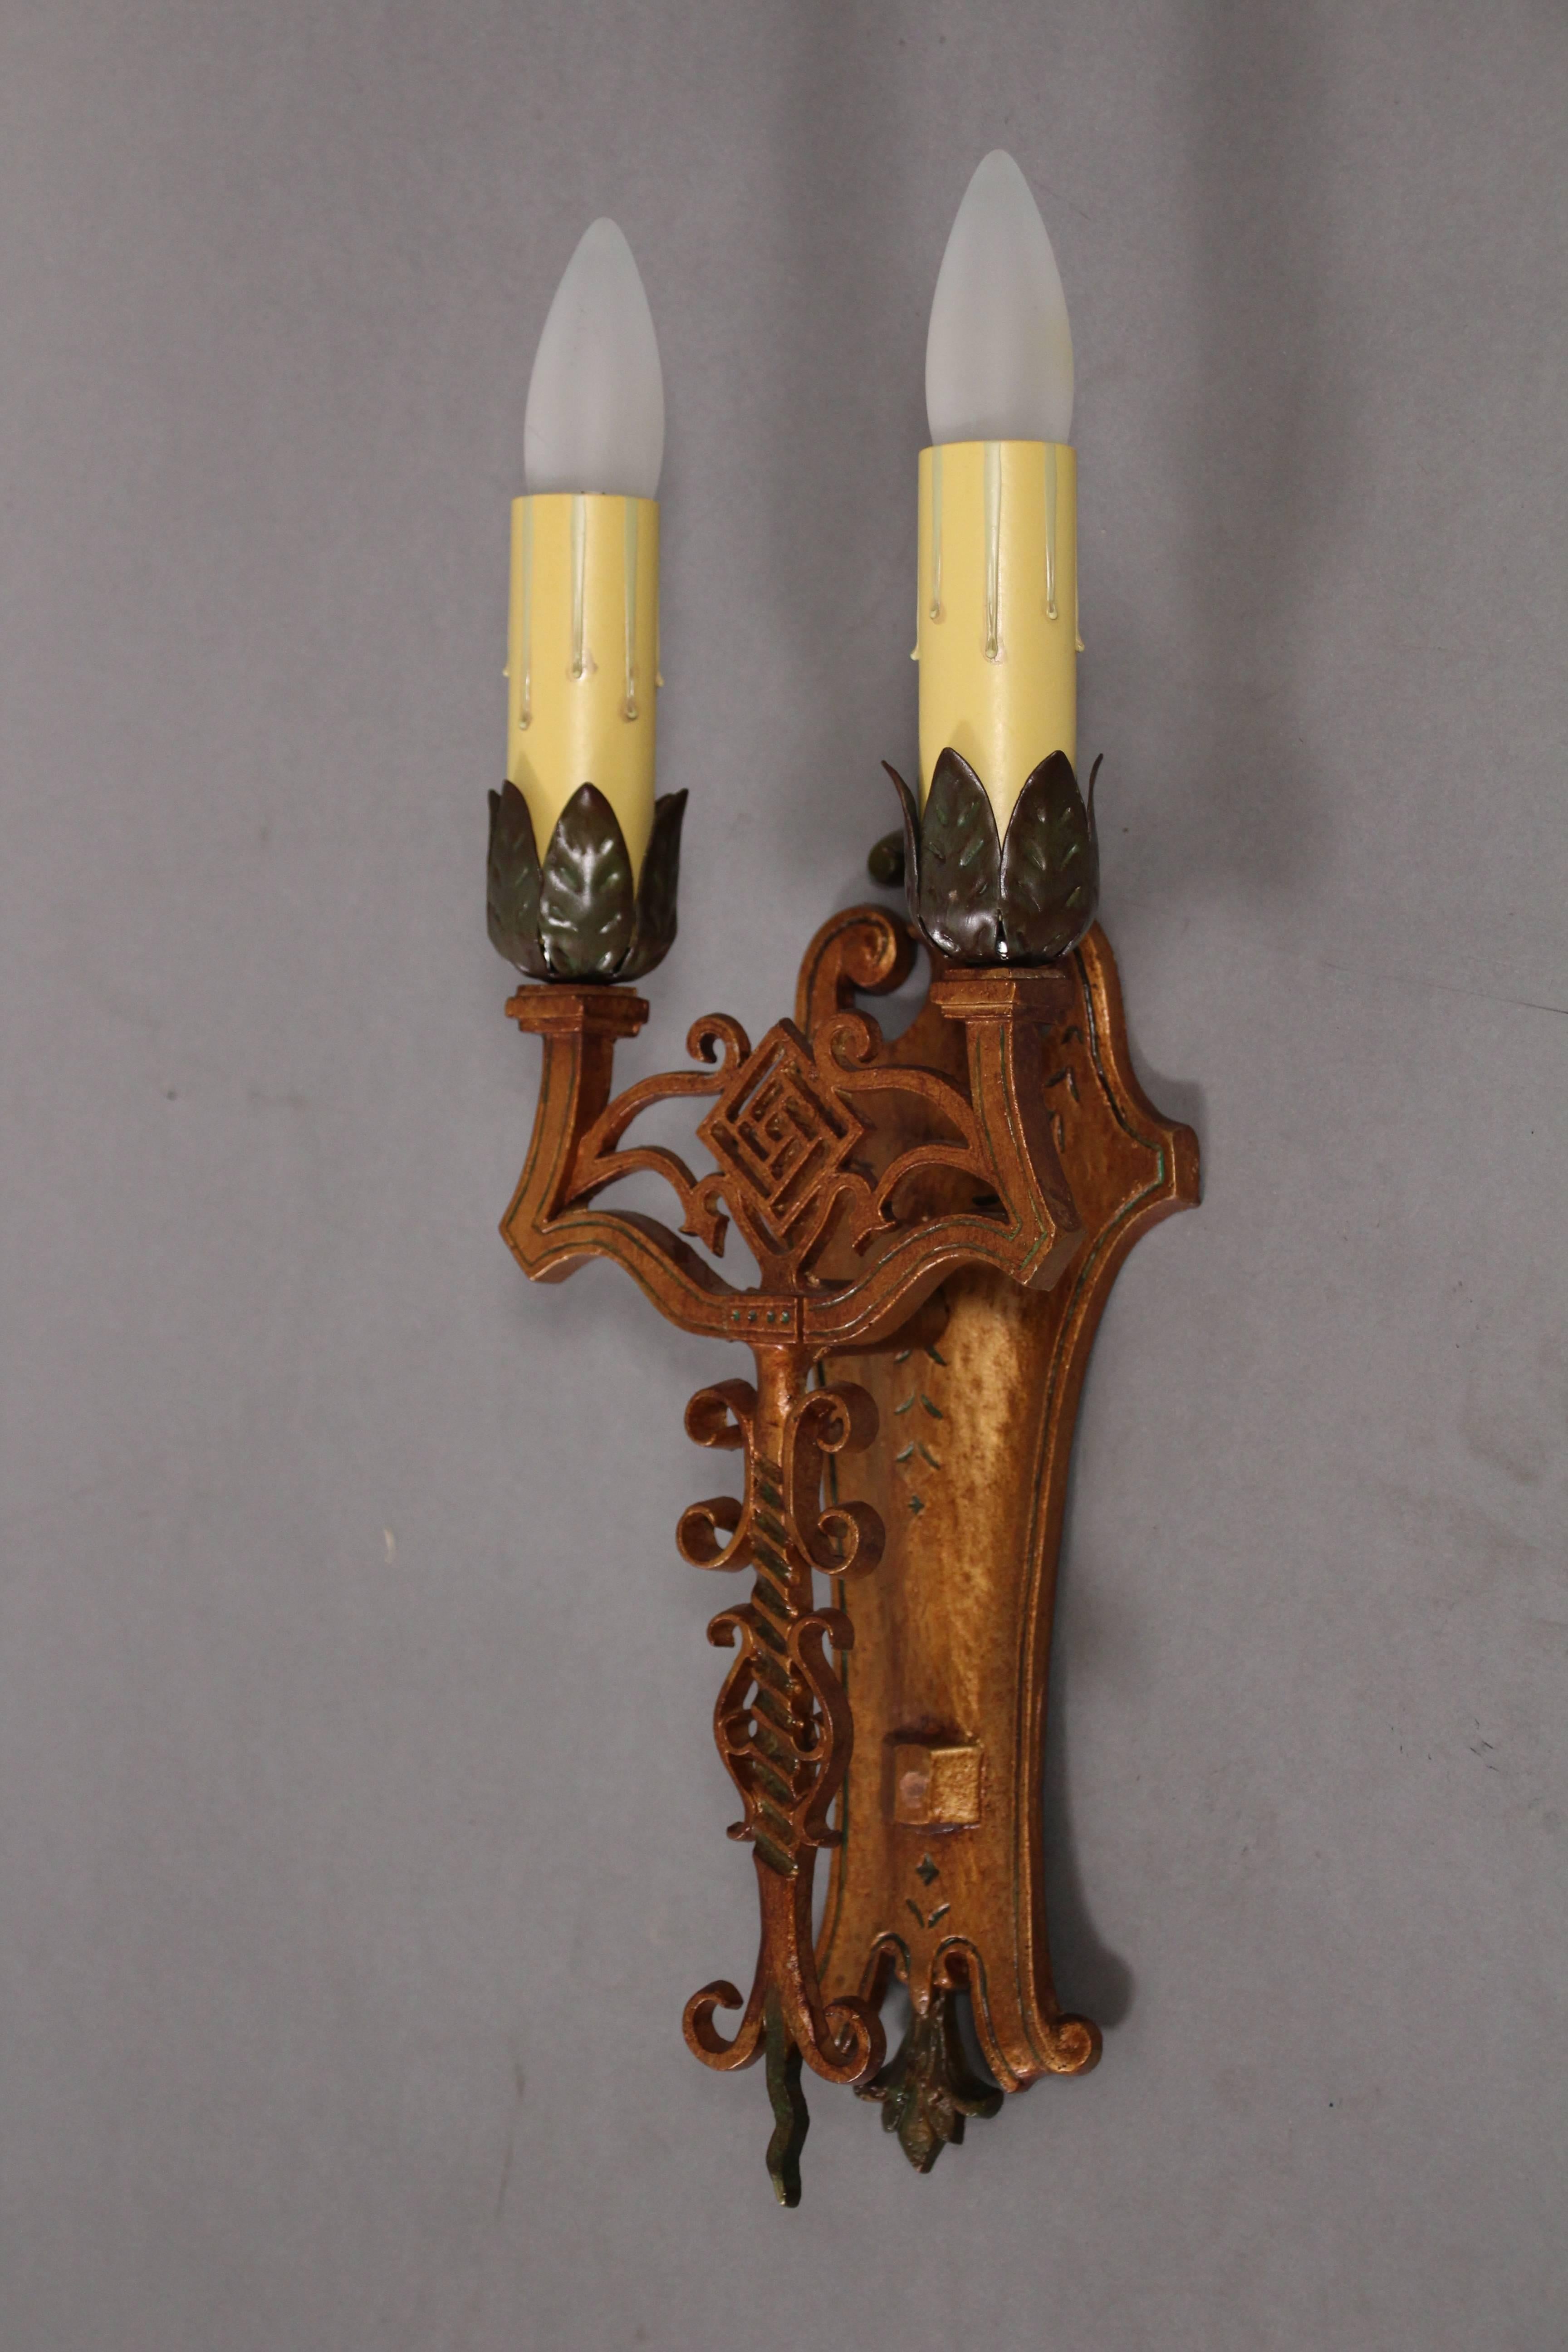 Pair of 1920s sconces with original polychrome finish. Fits nicely in Spanish Revival, English Tudor and Gothic style homes.